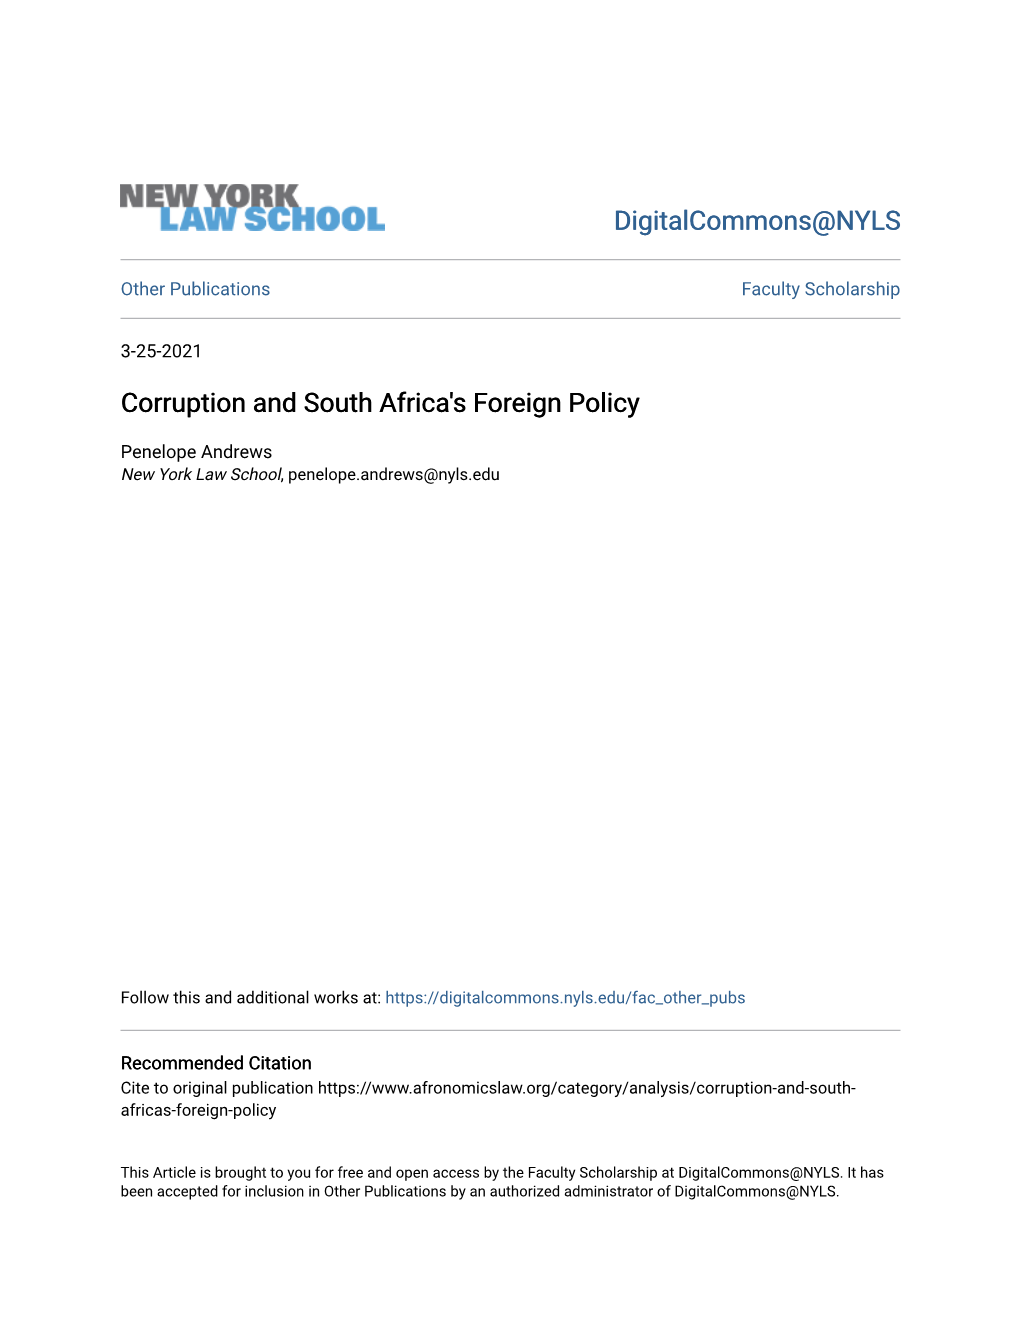 Corruption and South Africa's Foreign Policy